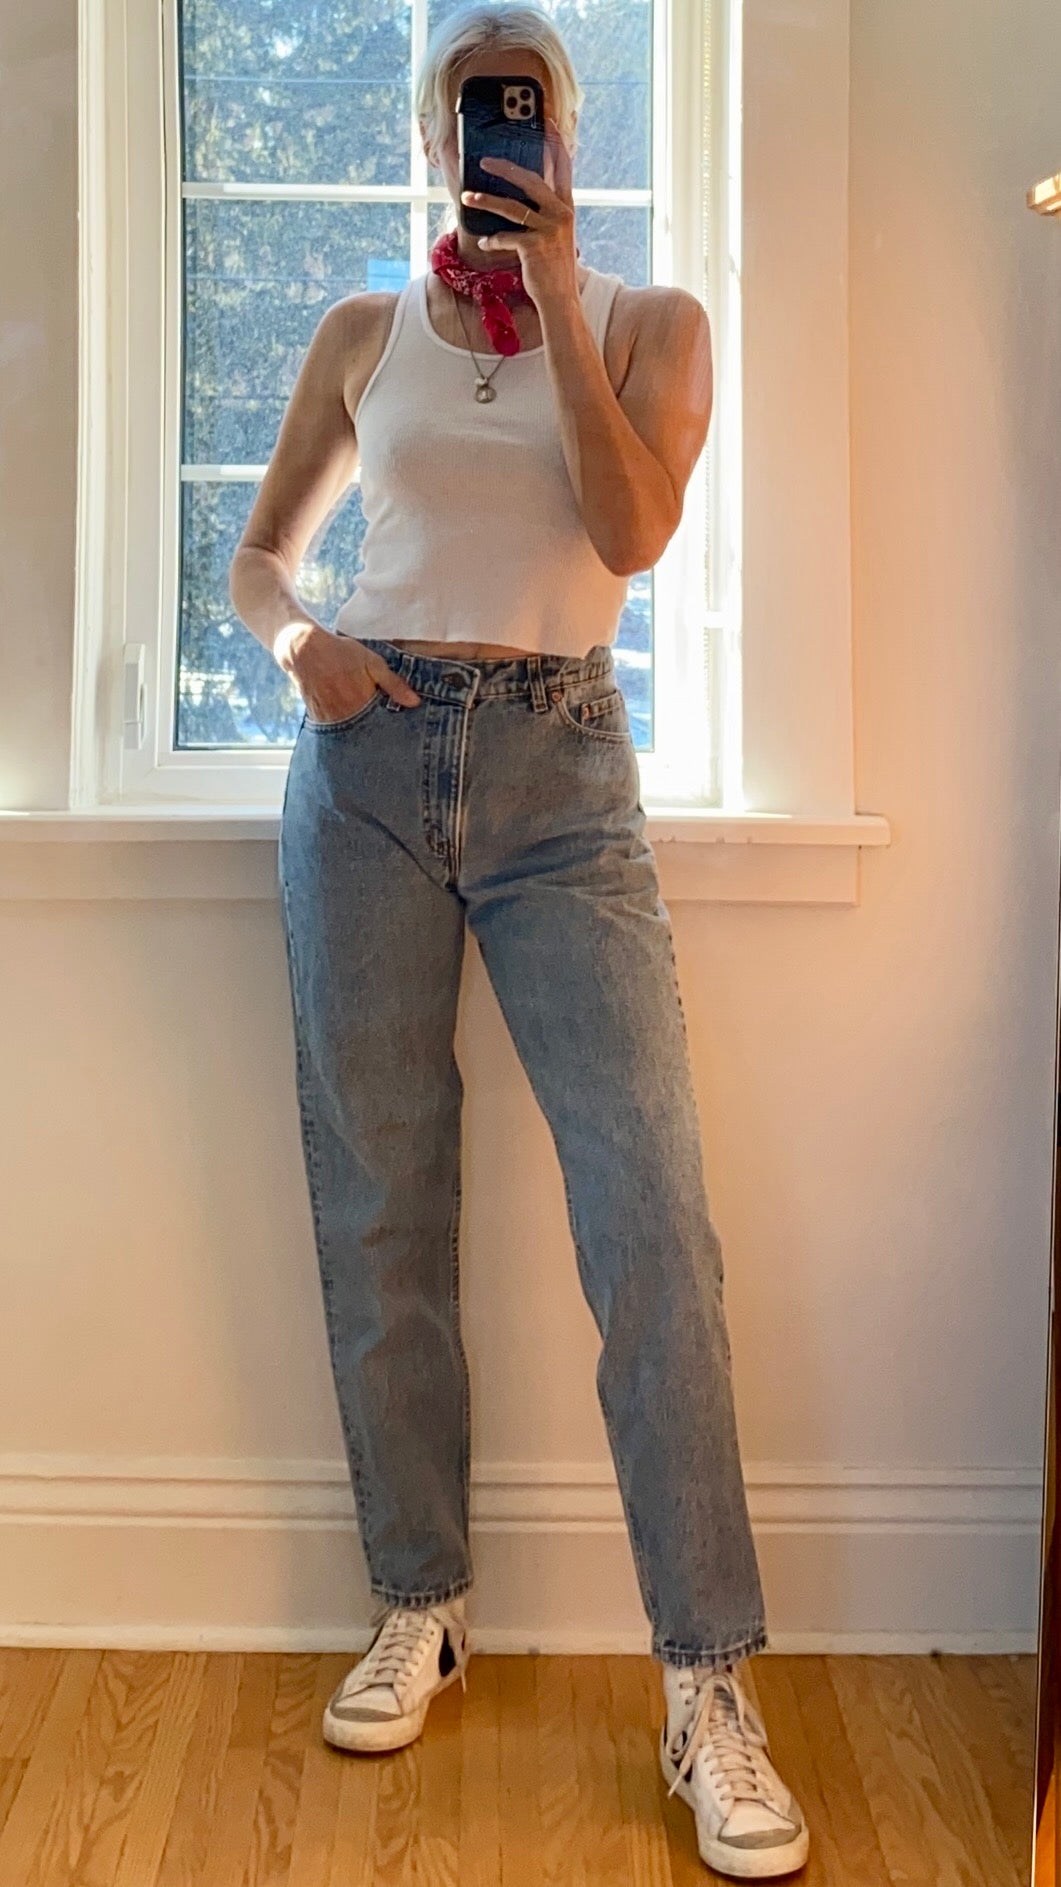 Vintage 1990s 550 Levis Relaxed Fit Light to Medium Wash Jeans size 29 USA